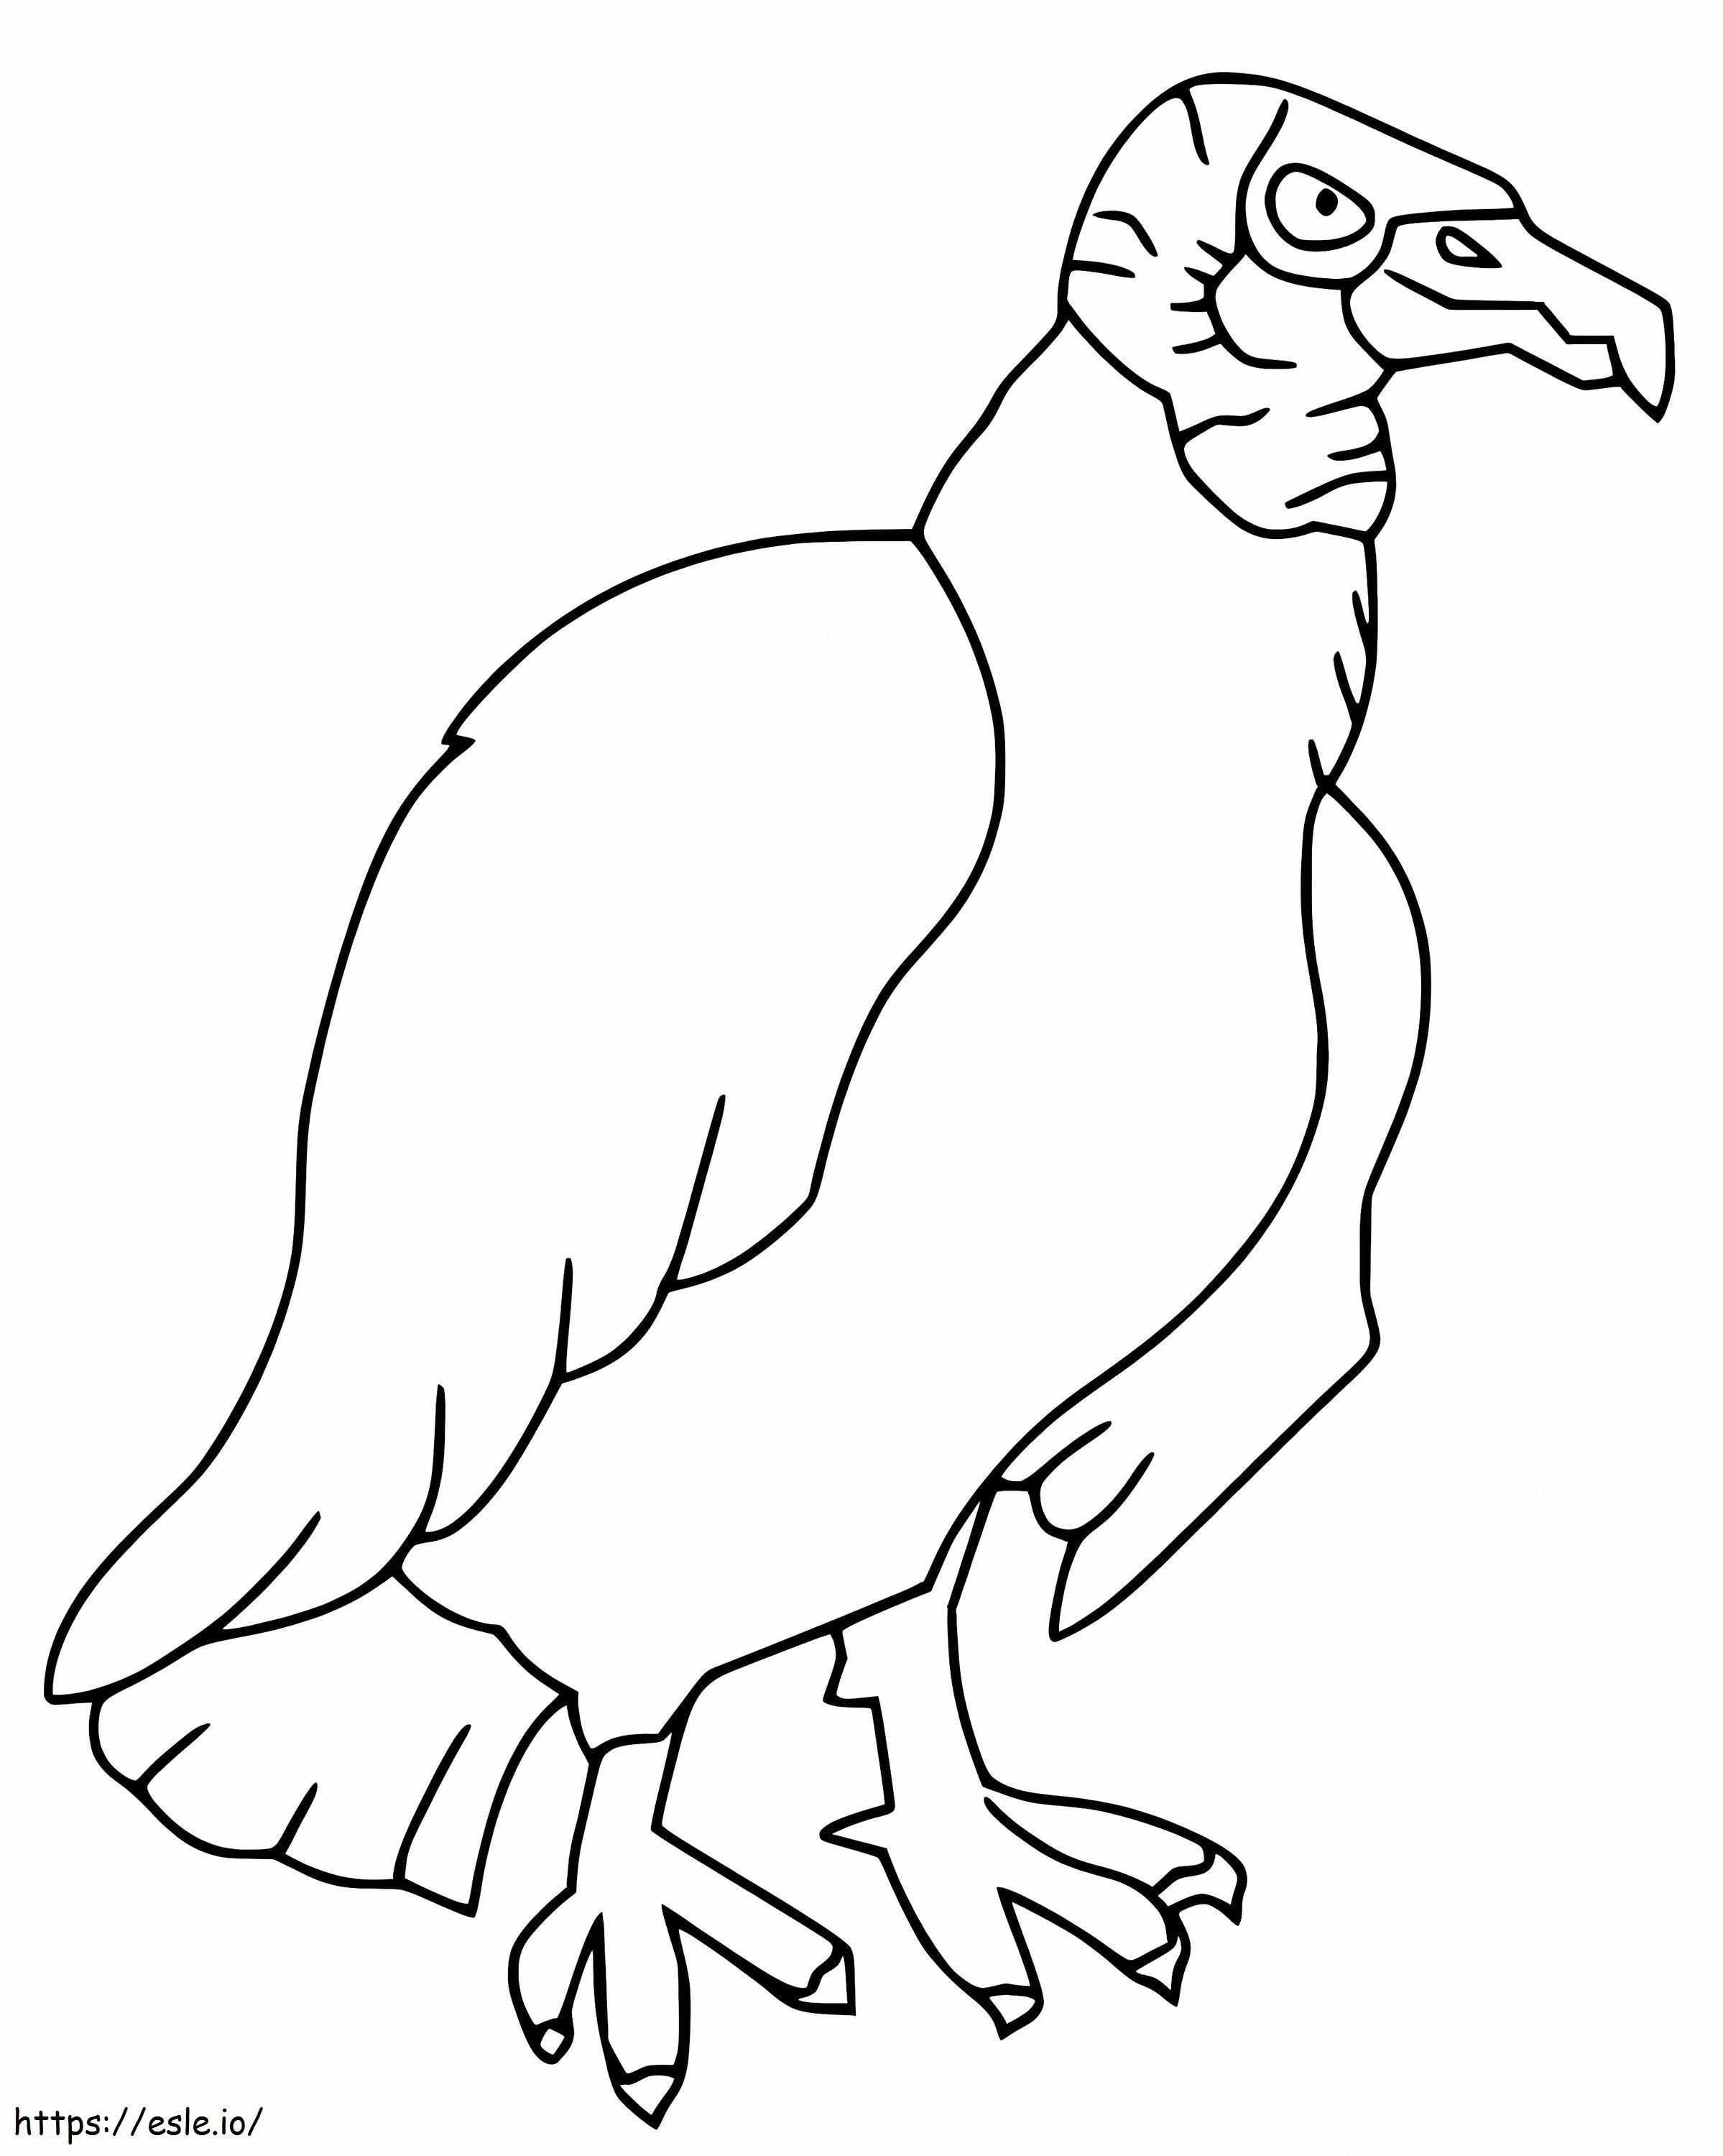 Ugly Vulture 1 coloring page